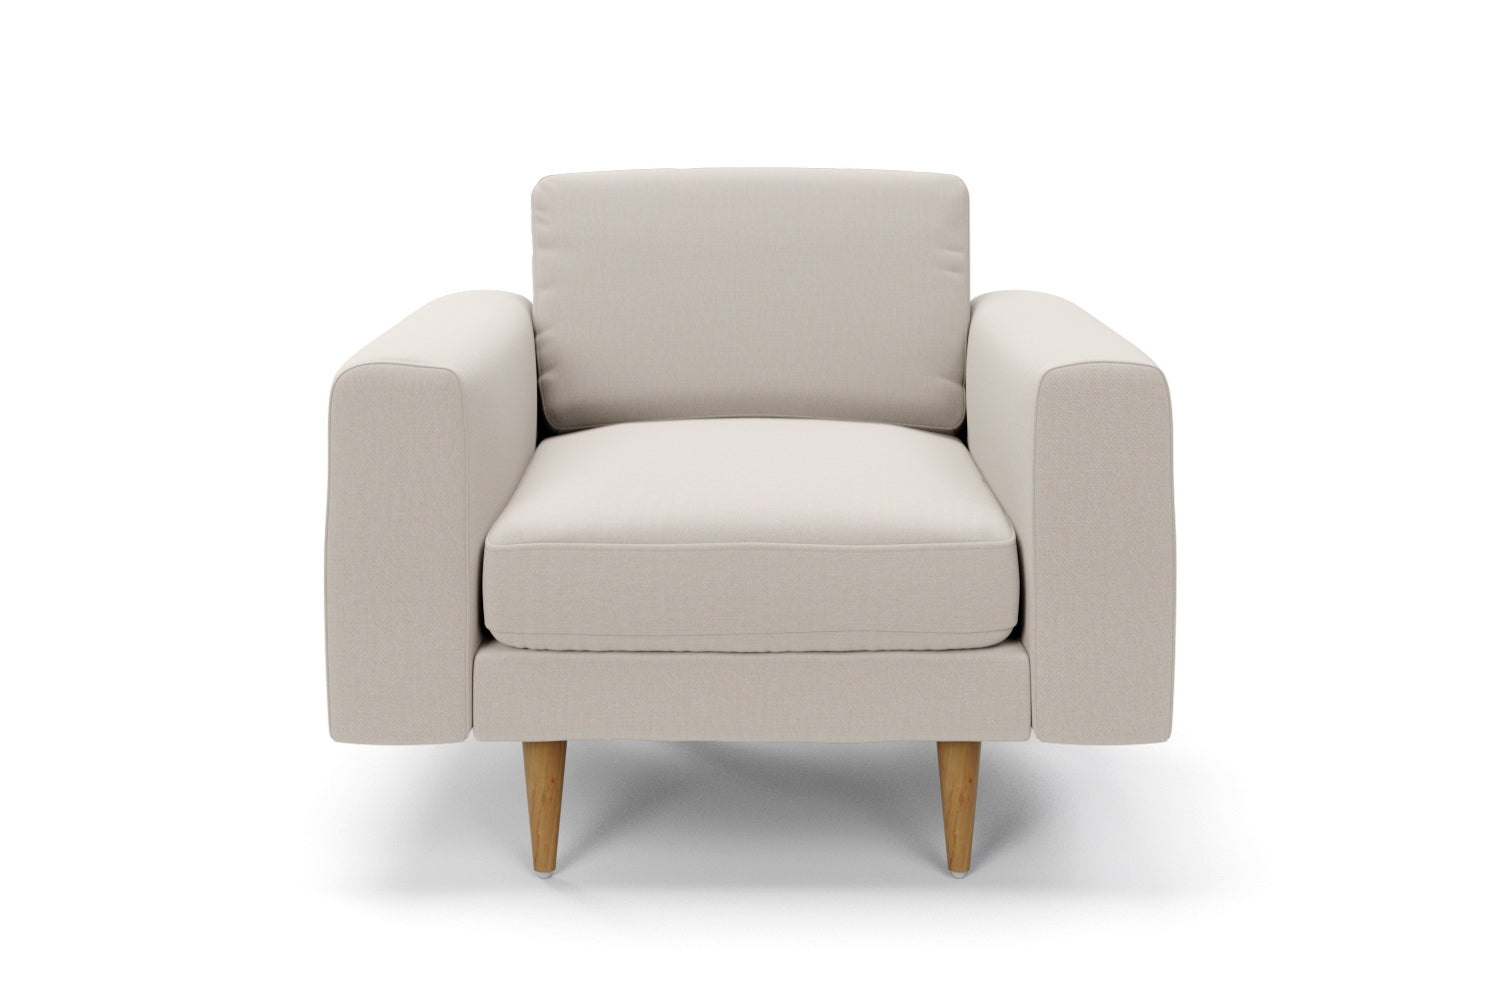 SNUG | The Big Chill 1 Seater Armchair in Biscuit variant_40520422654000